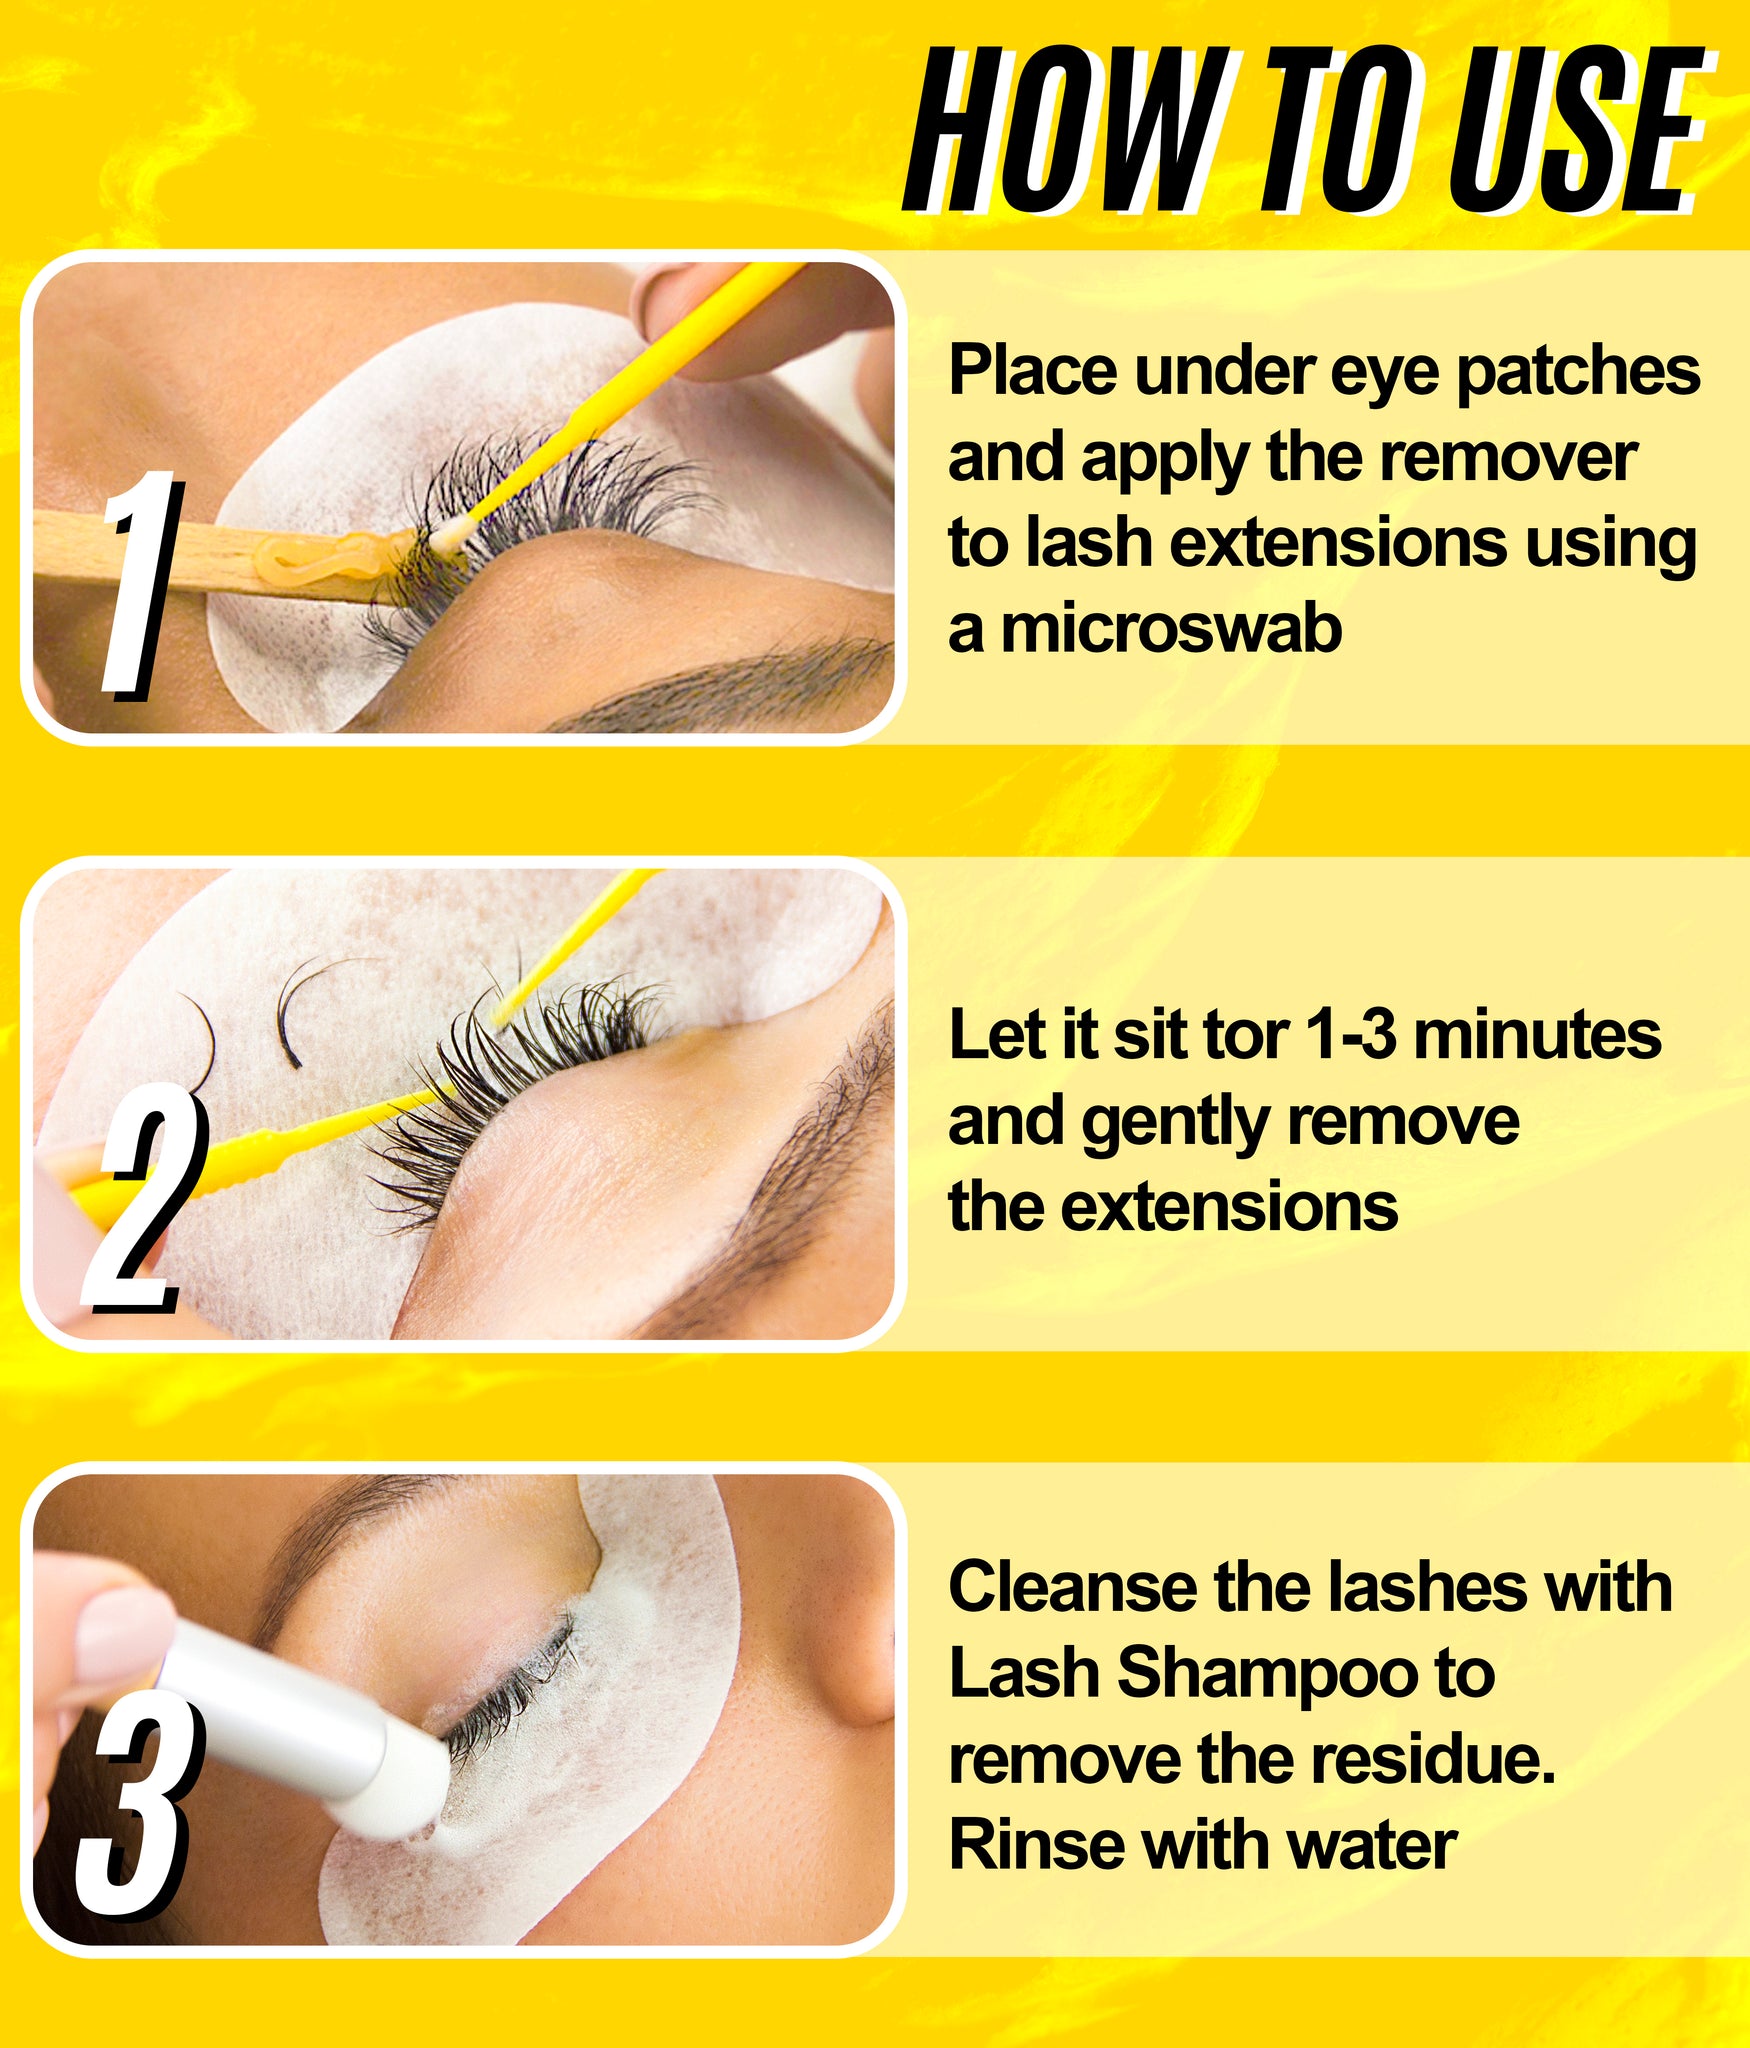 How to Remove Eyelash Extension Glue